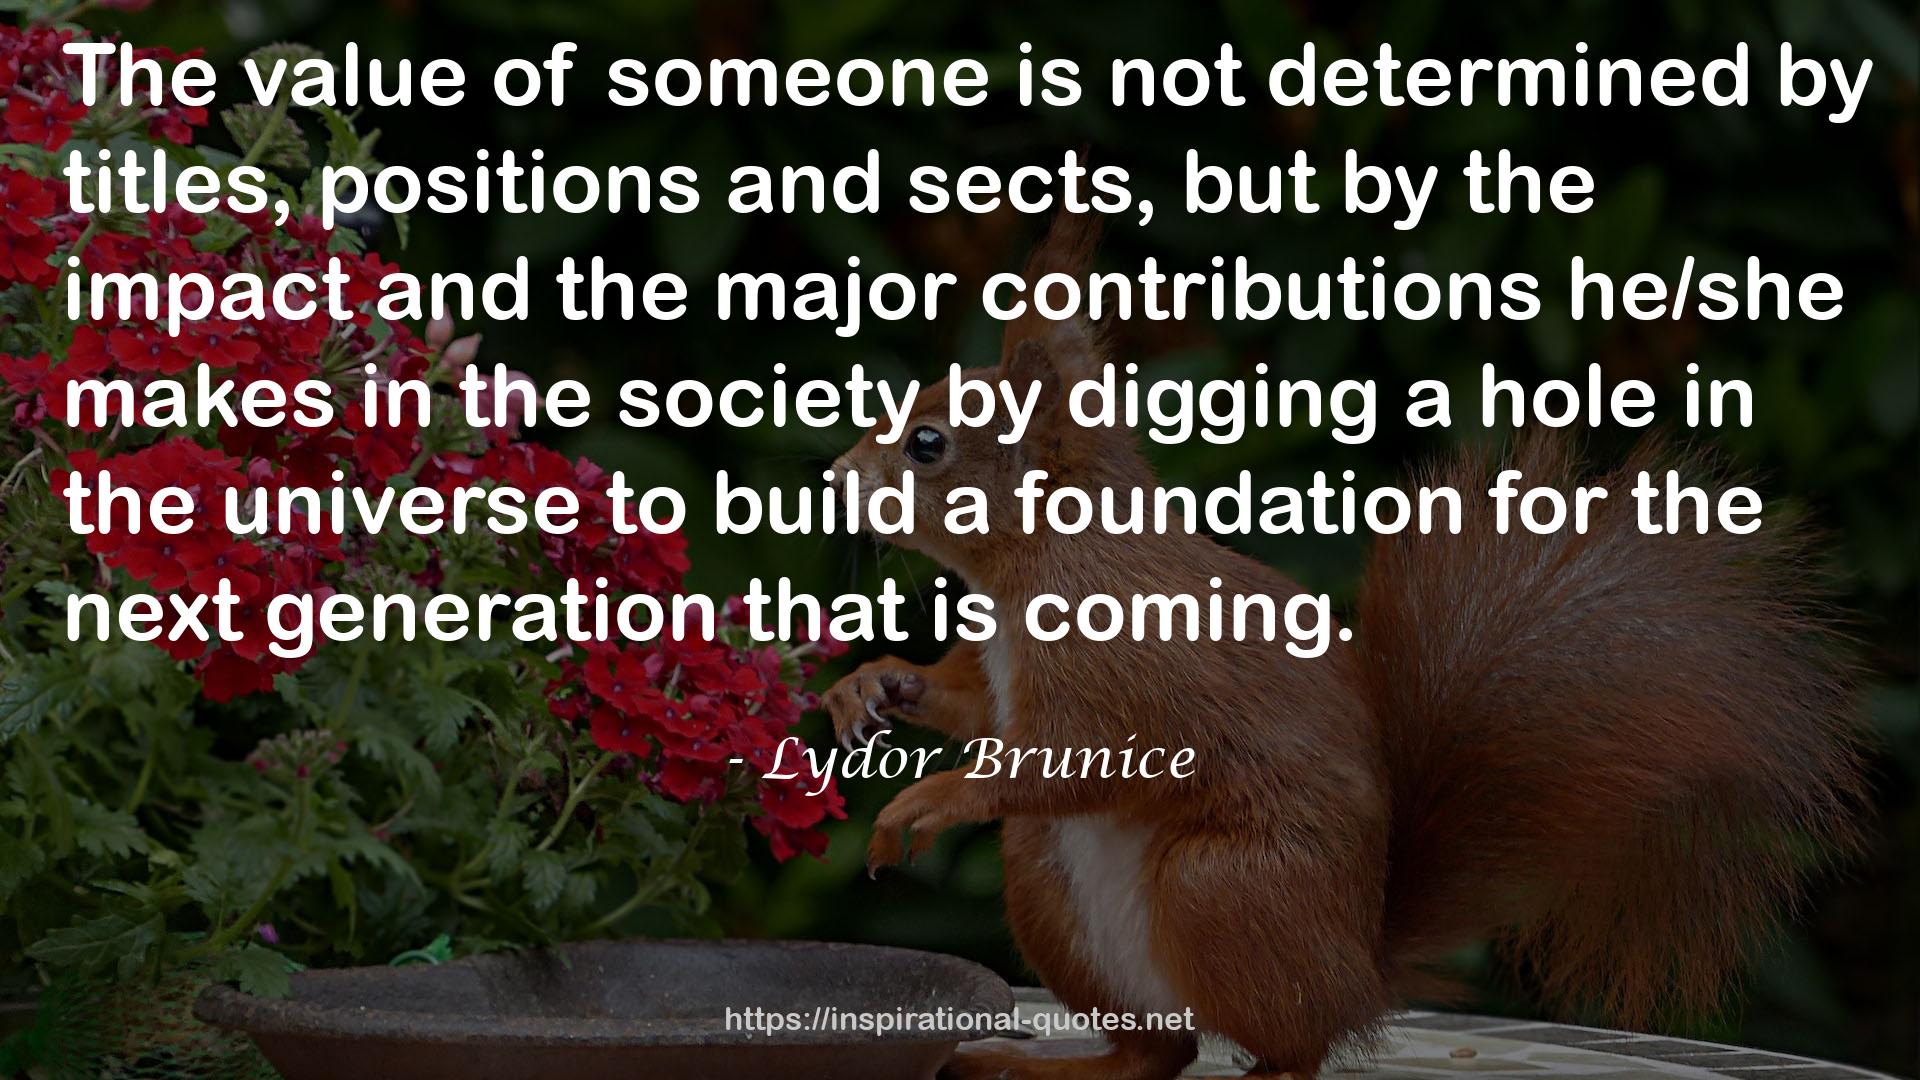 Lydor Brunice QUOTES